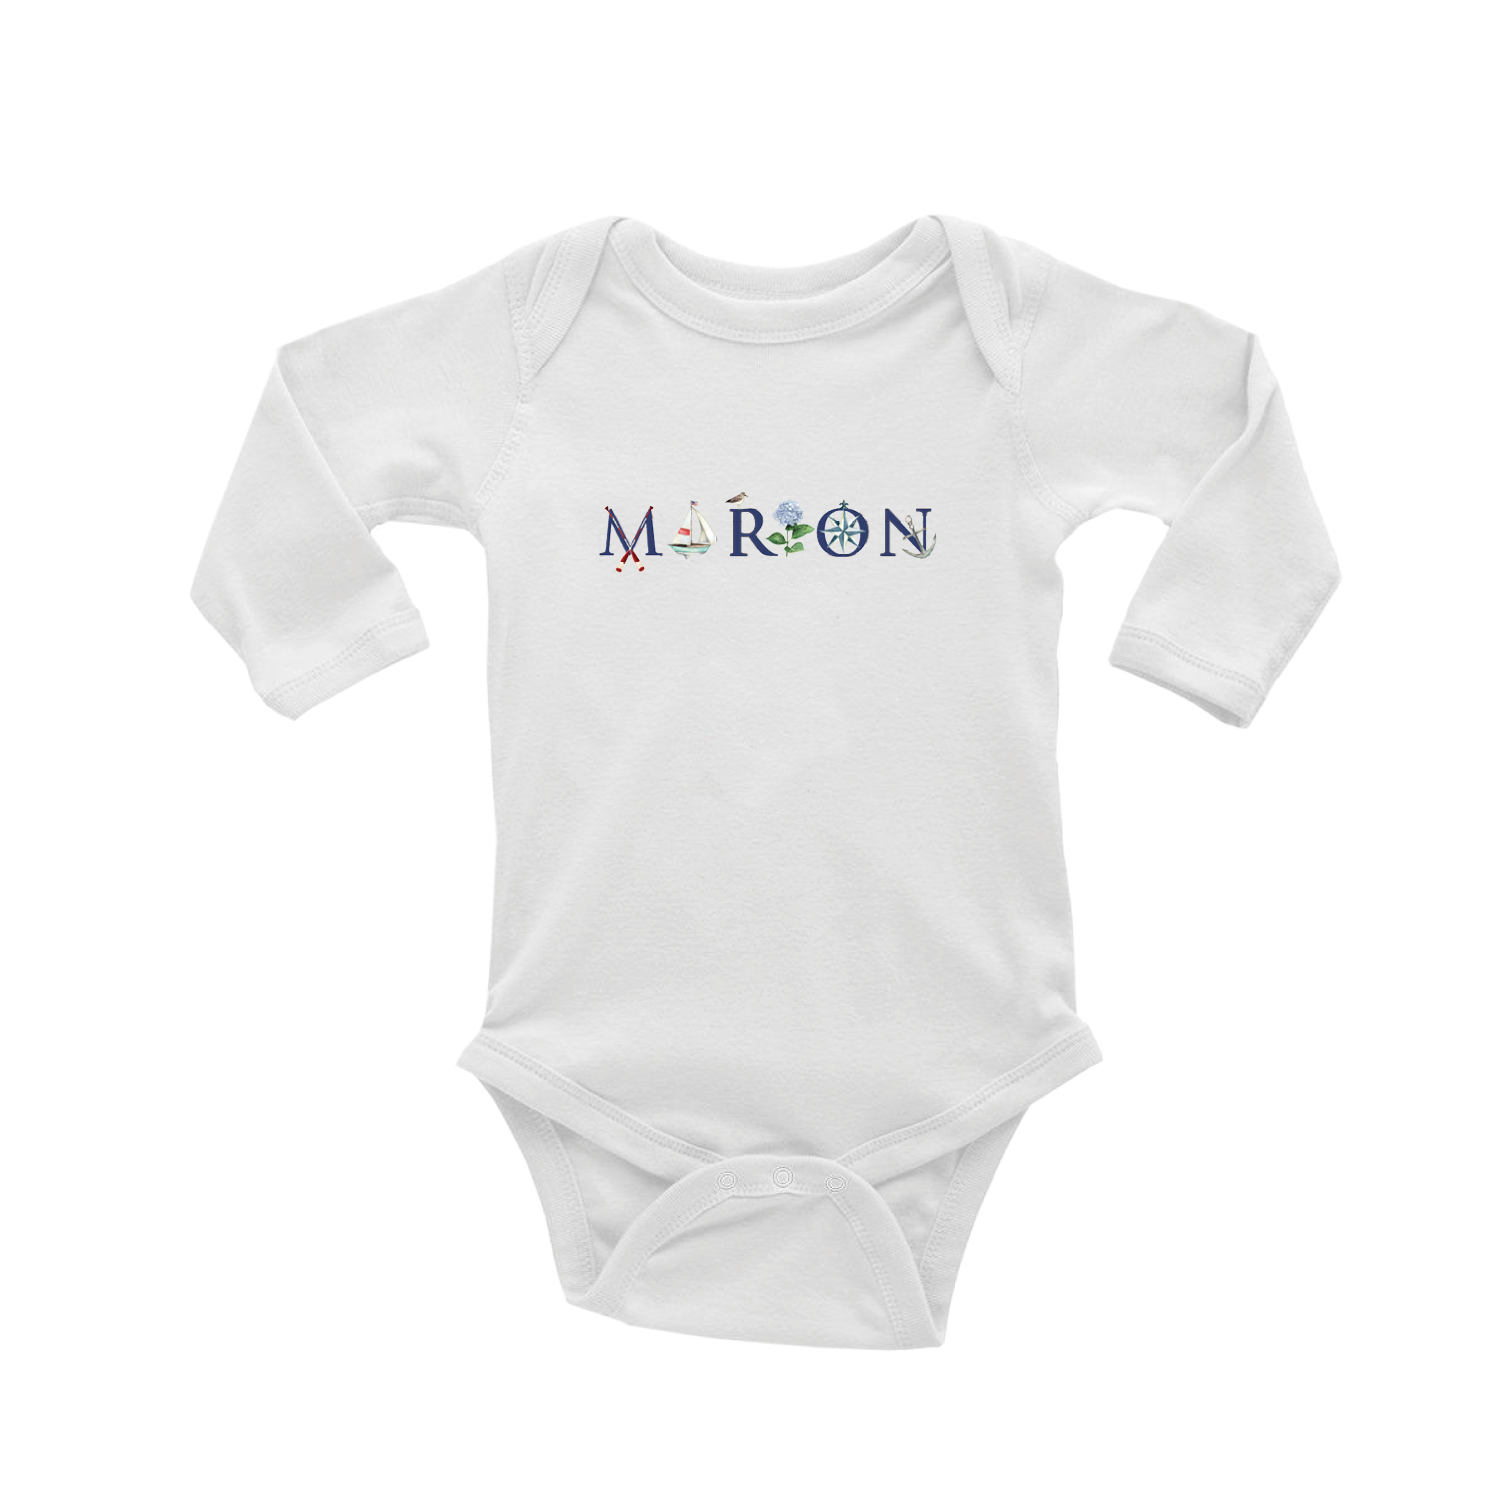 Marion baby snap up long sleeve